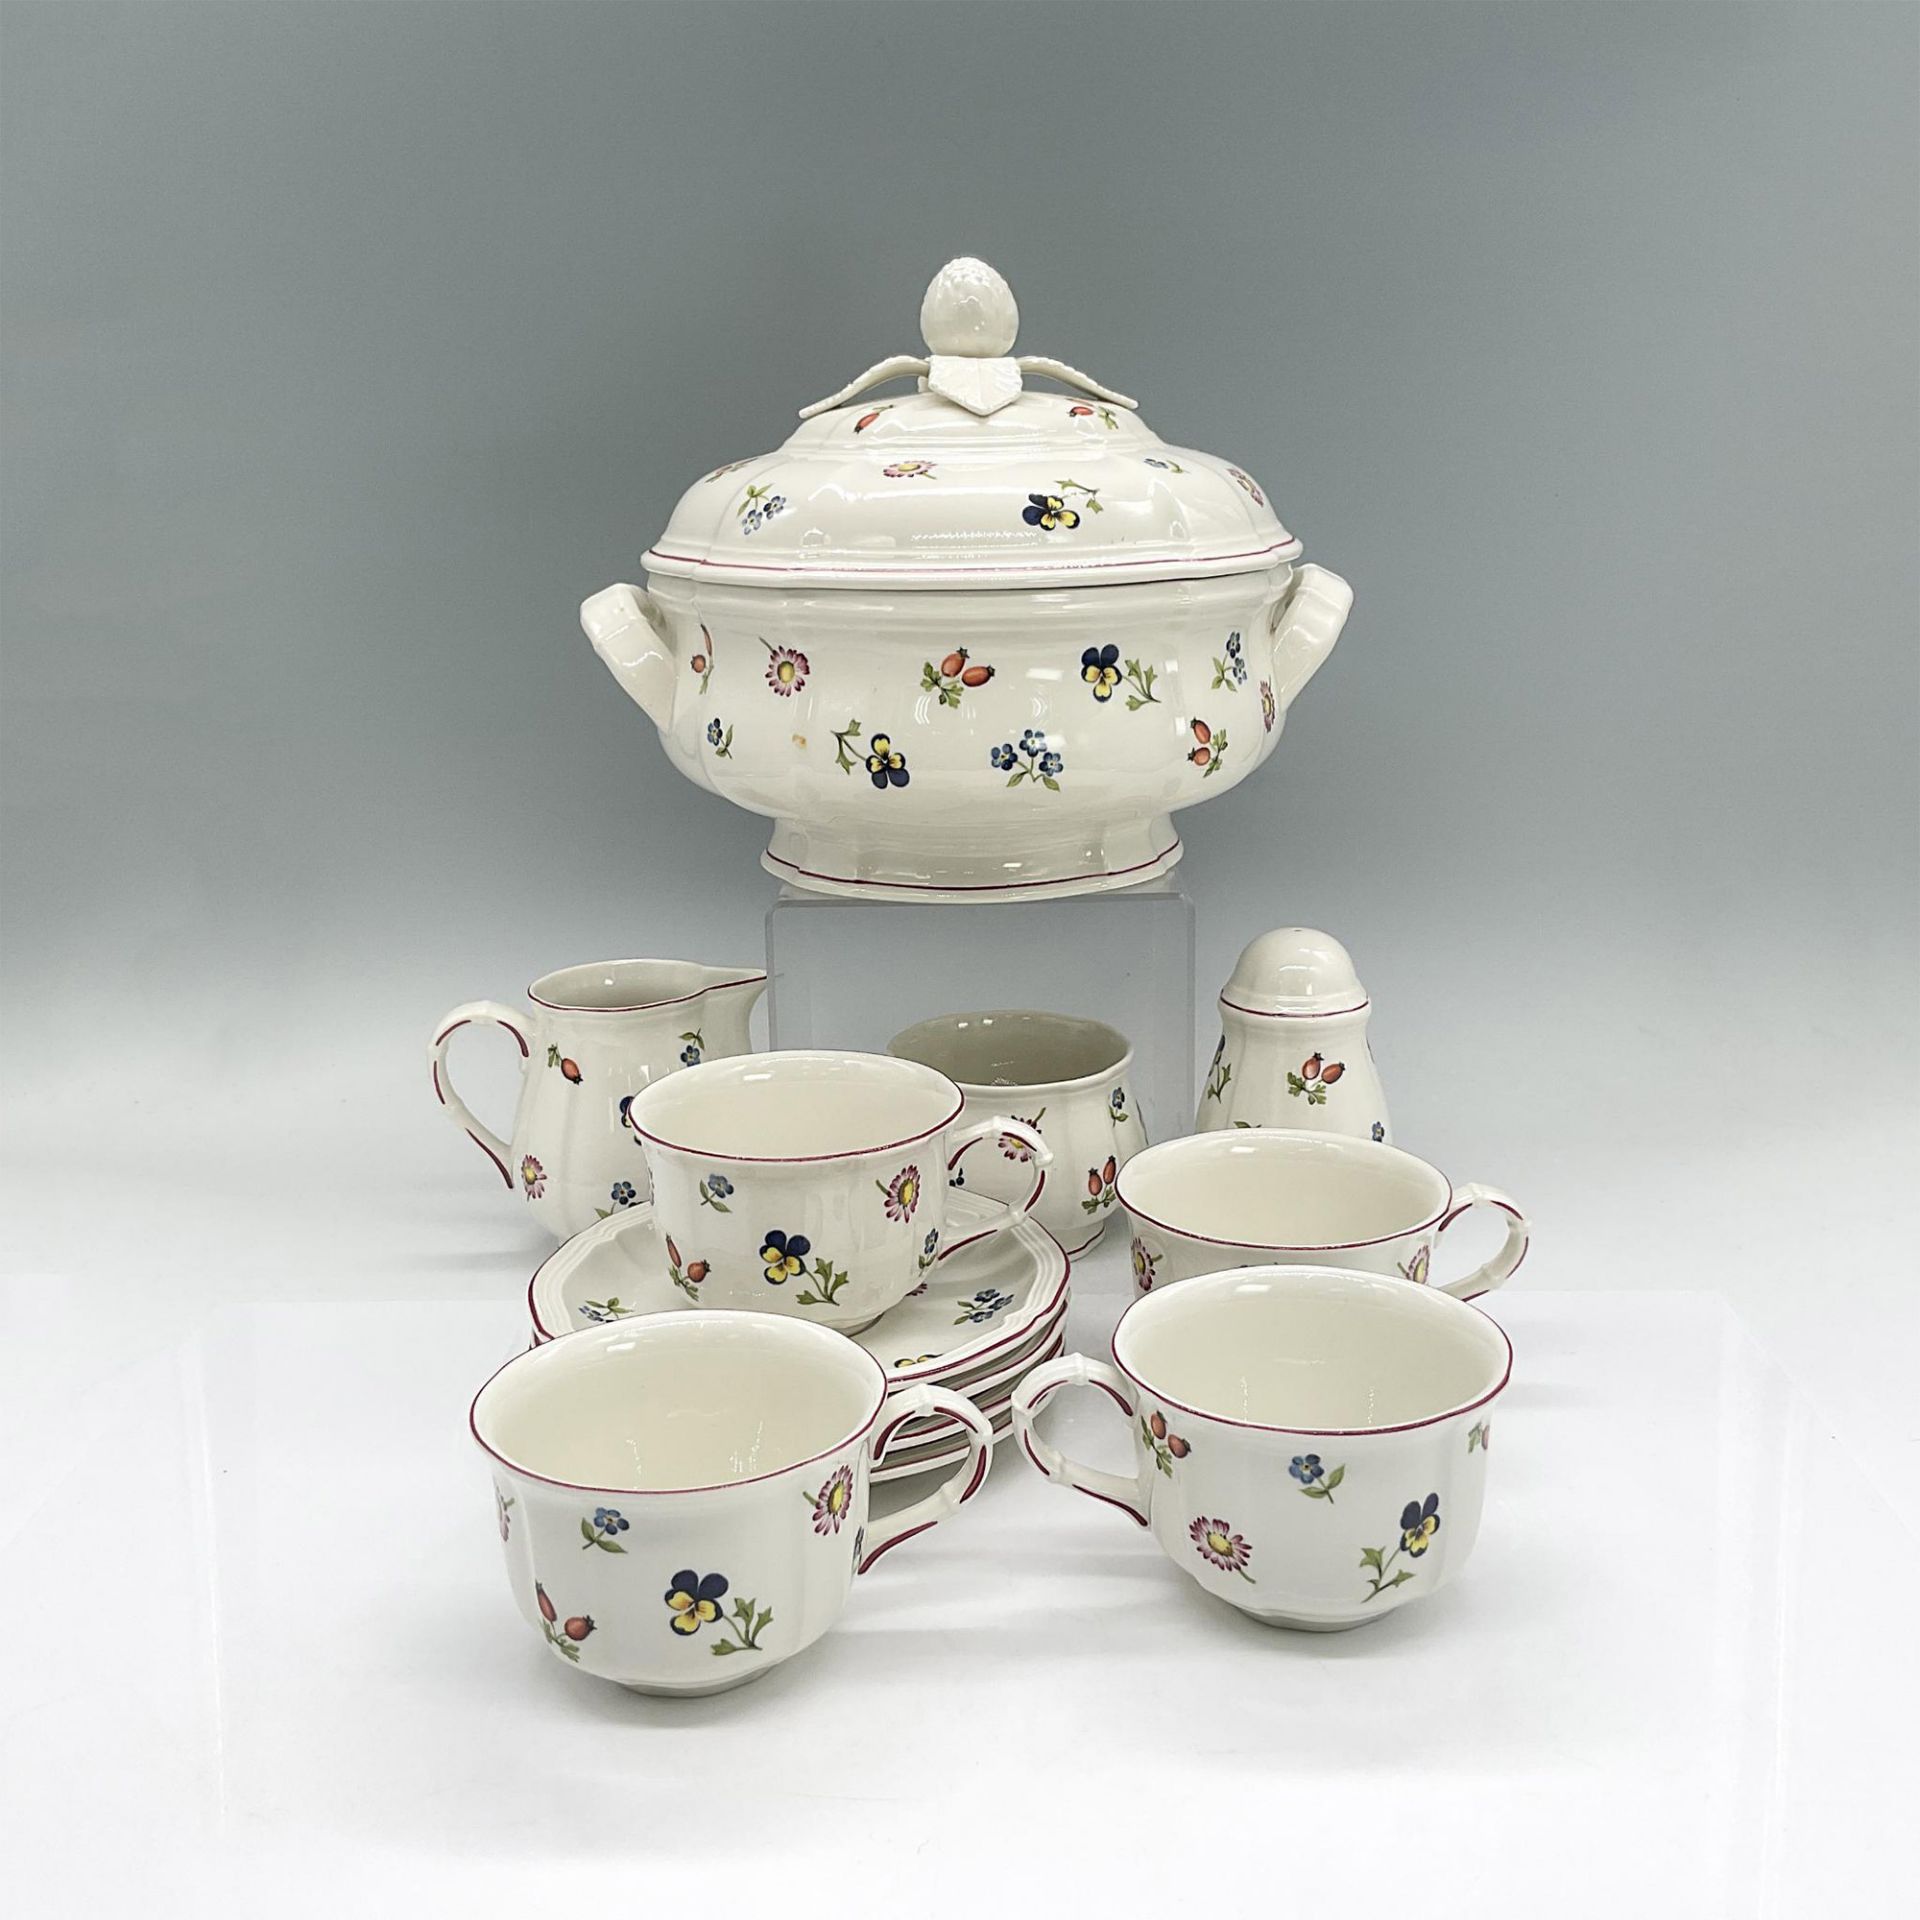 13pc Villeroy + Boch Tea/Coffee Serving Set + Covered Dish